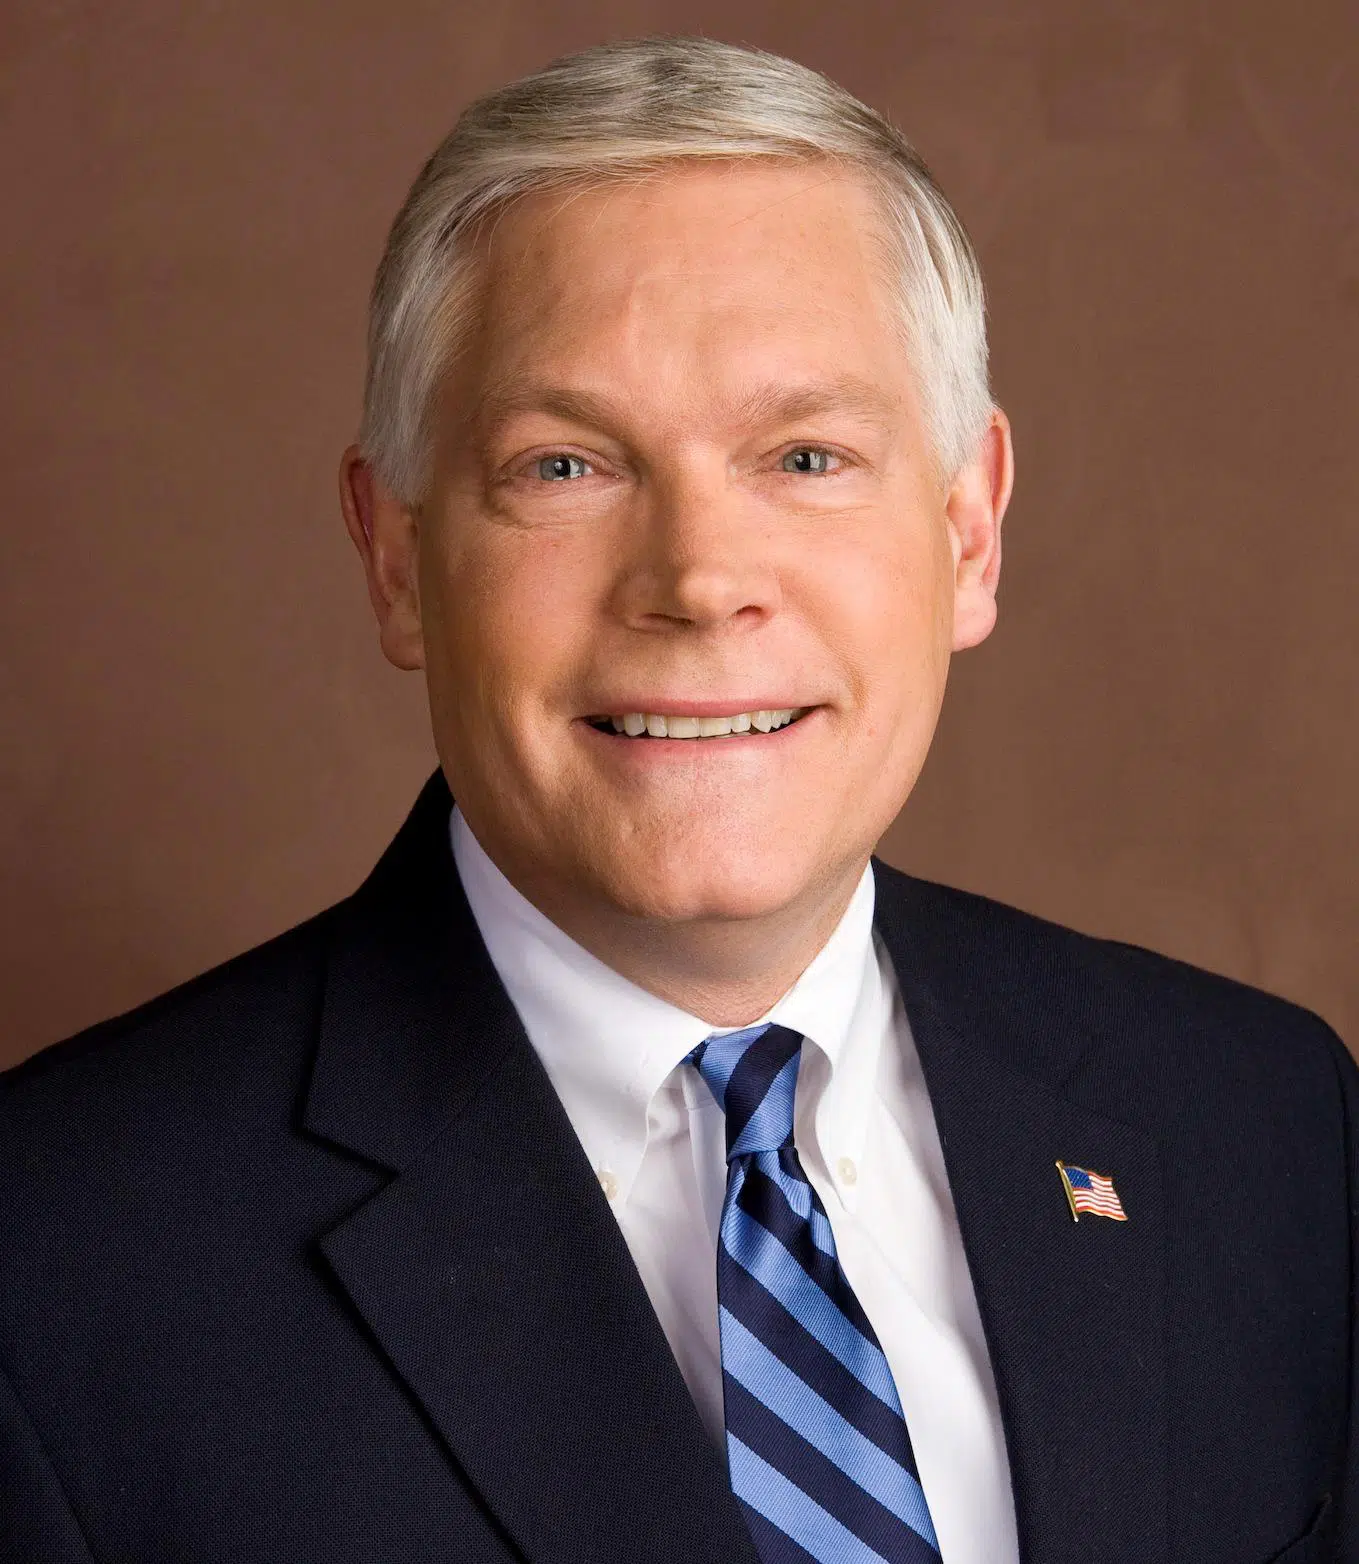 TX-17: Pete Sessions (R)